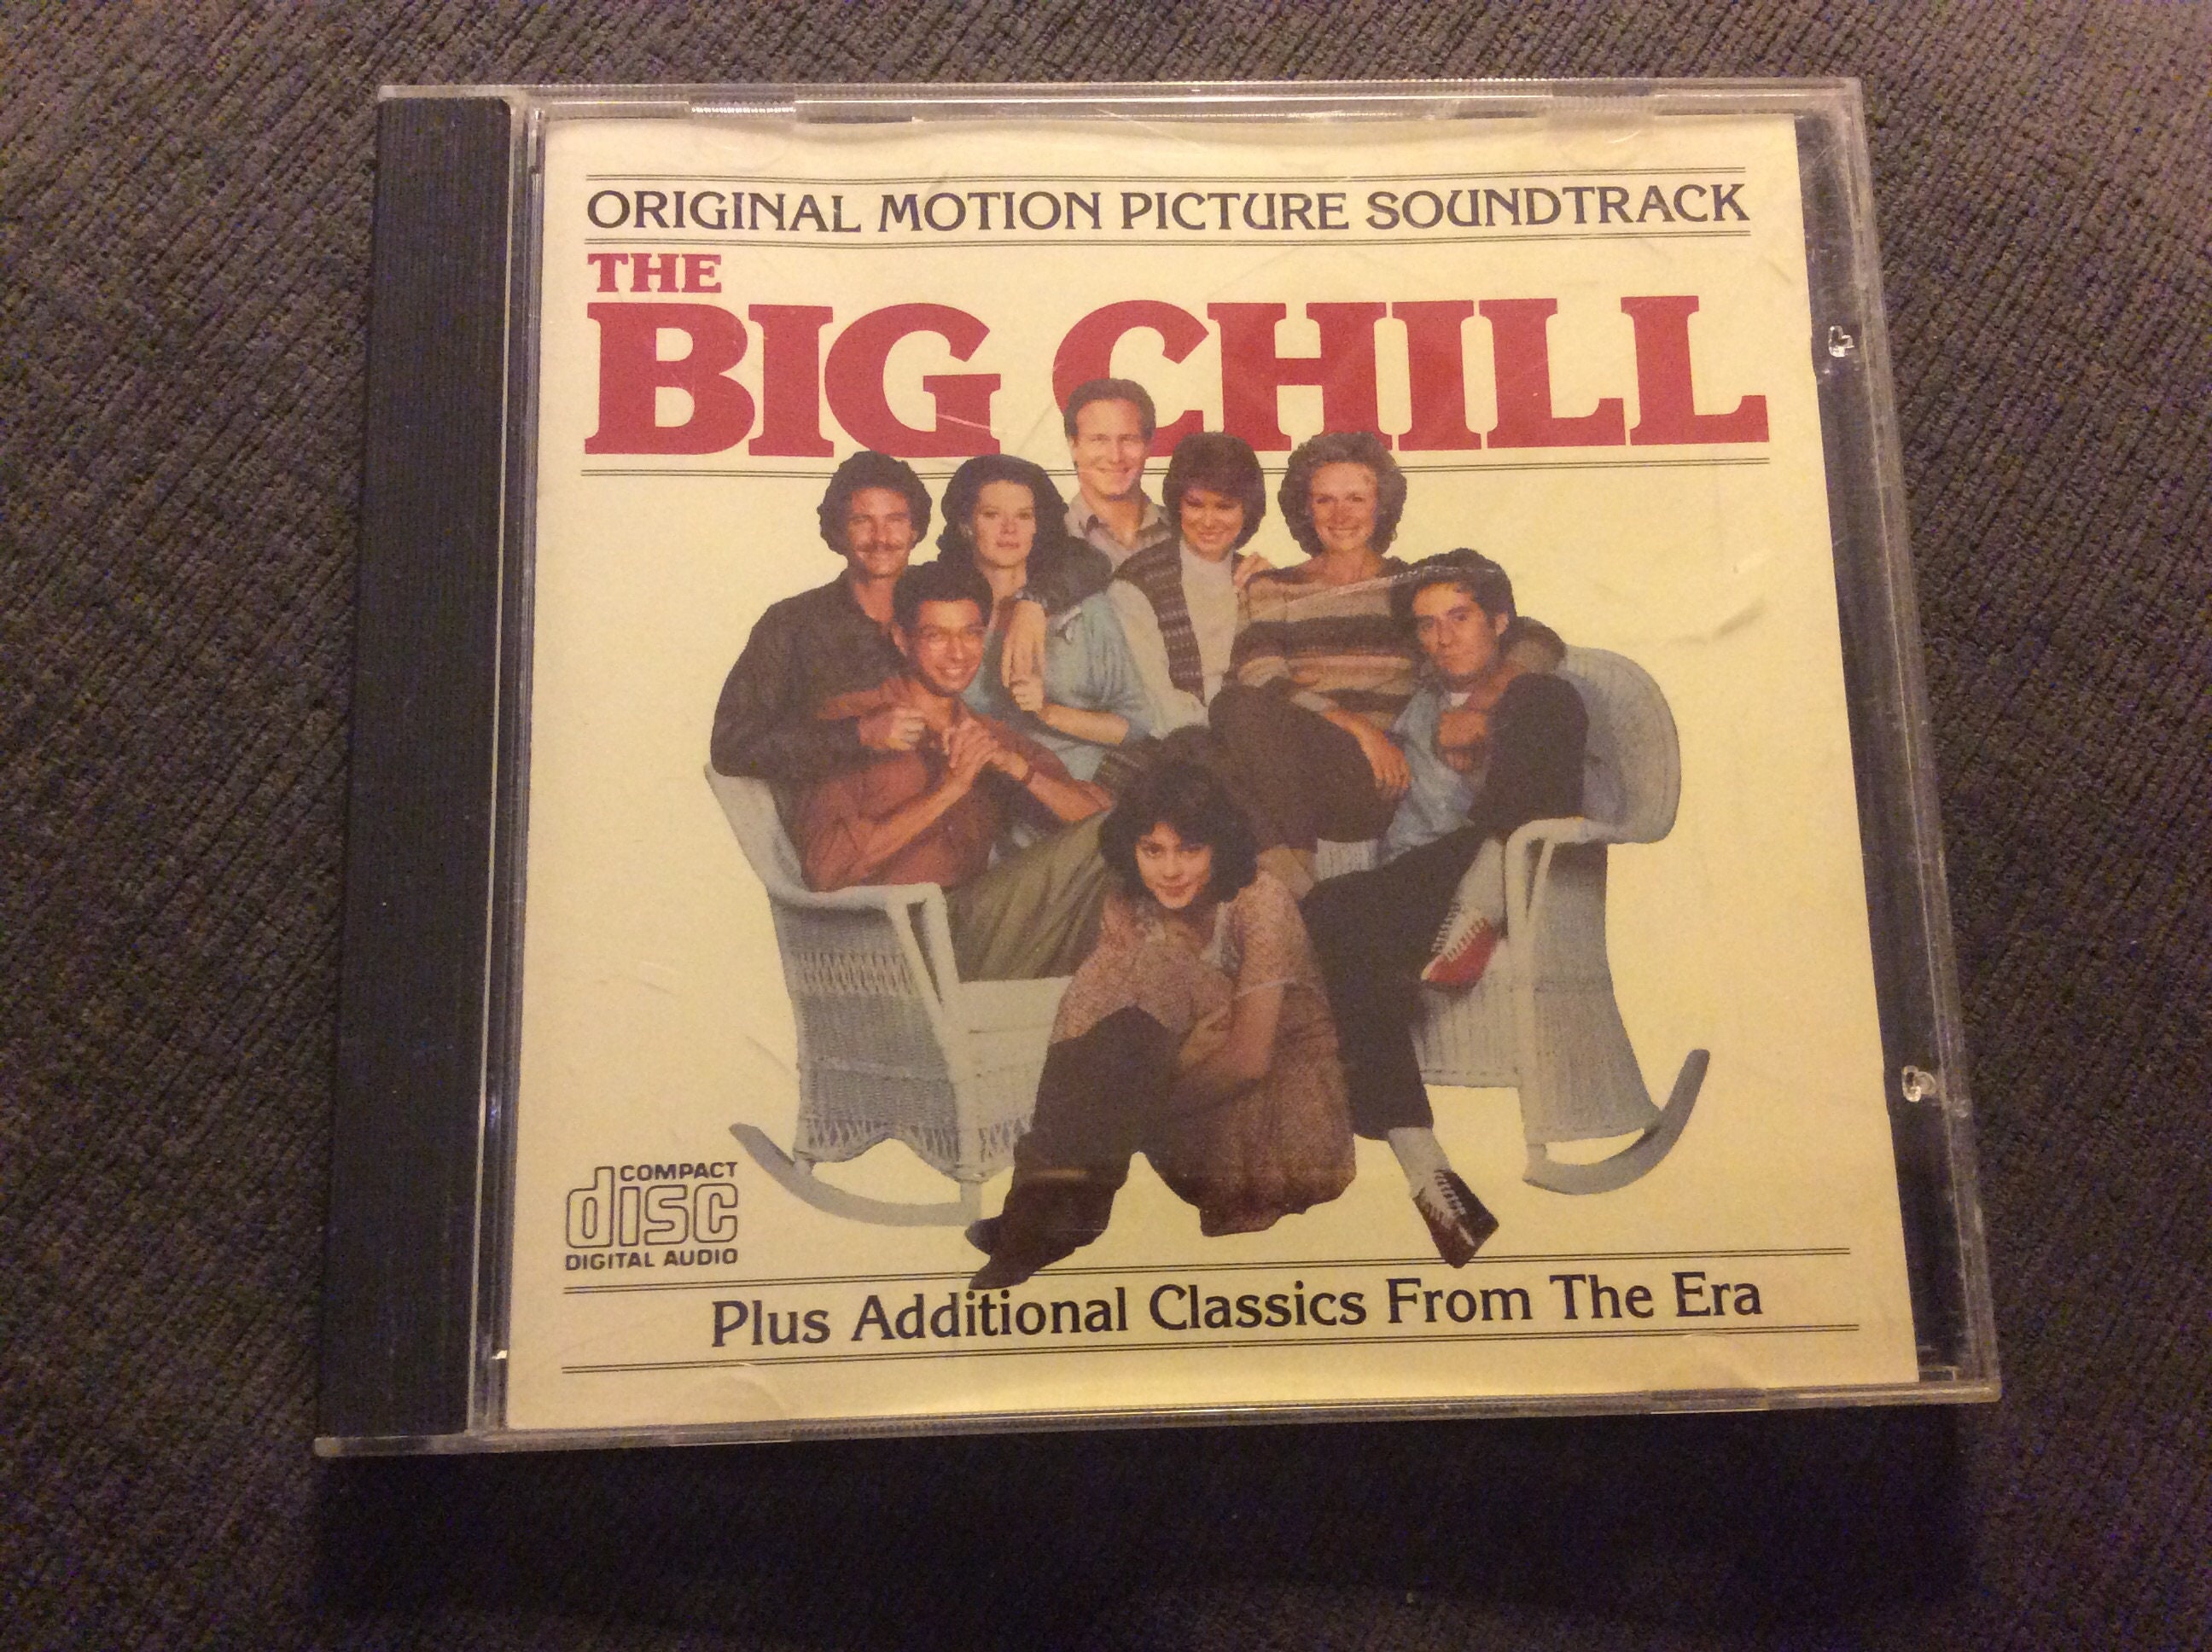 Like　Soundtrack　Chill　Etsy　New　Big　CD　Movie　The　India